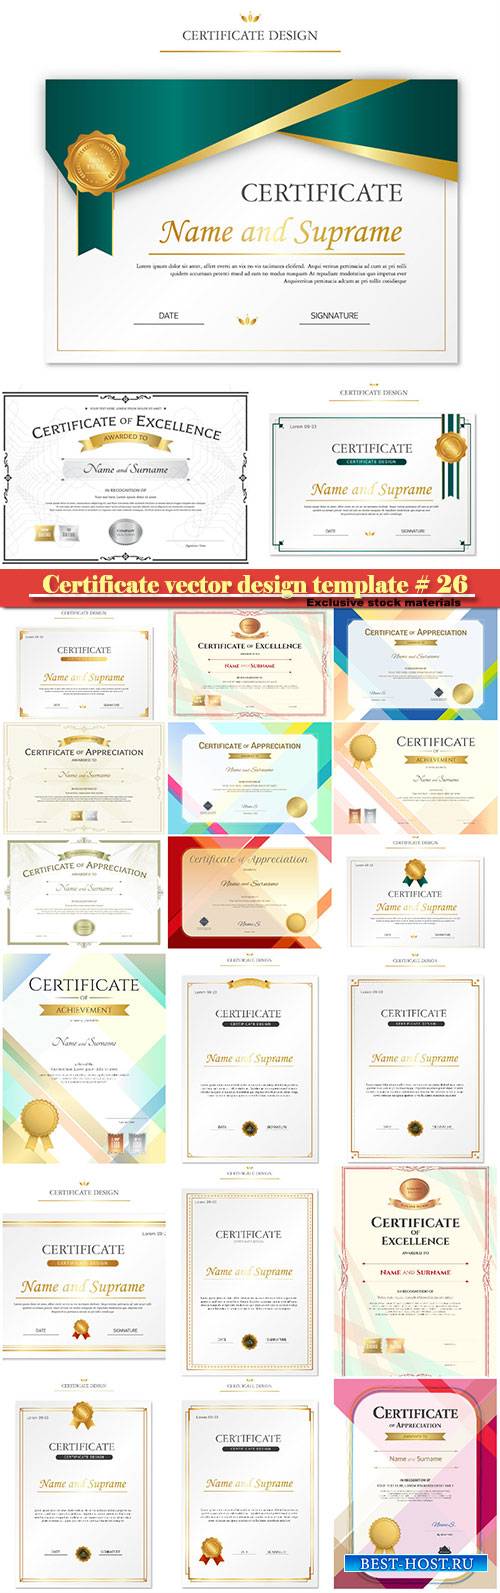 Certificate and vector diploma design template # 26